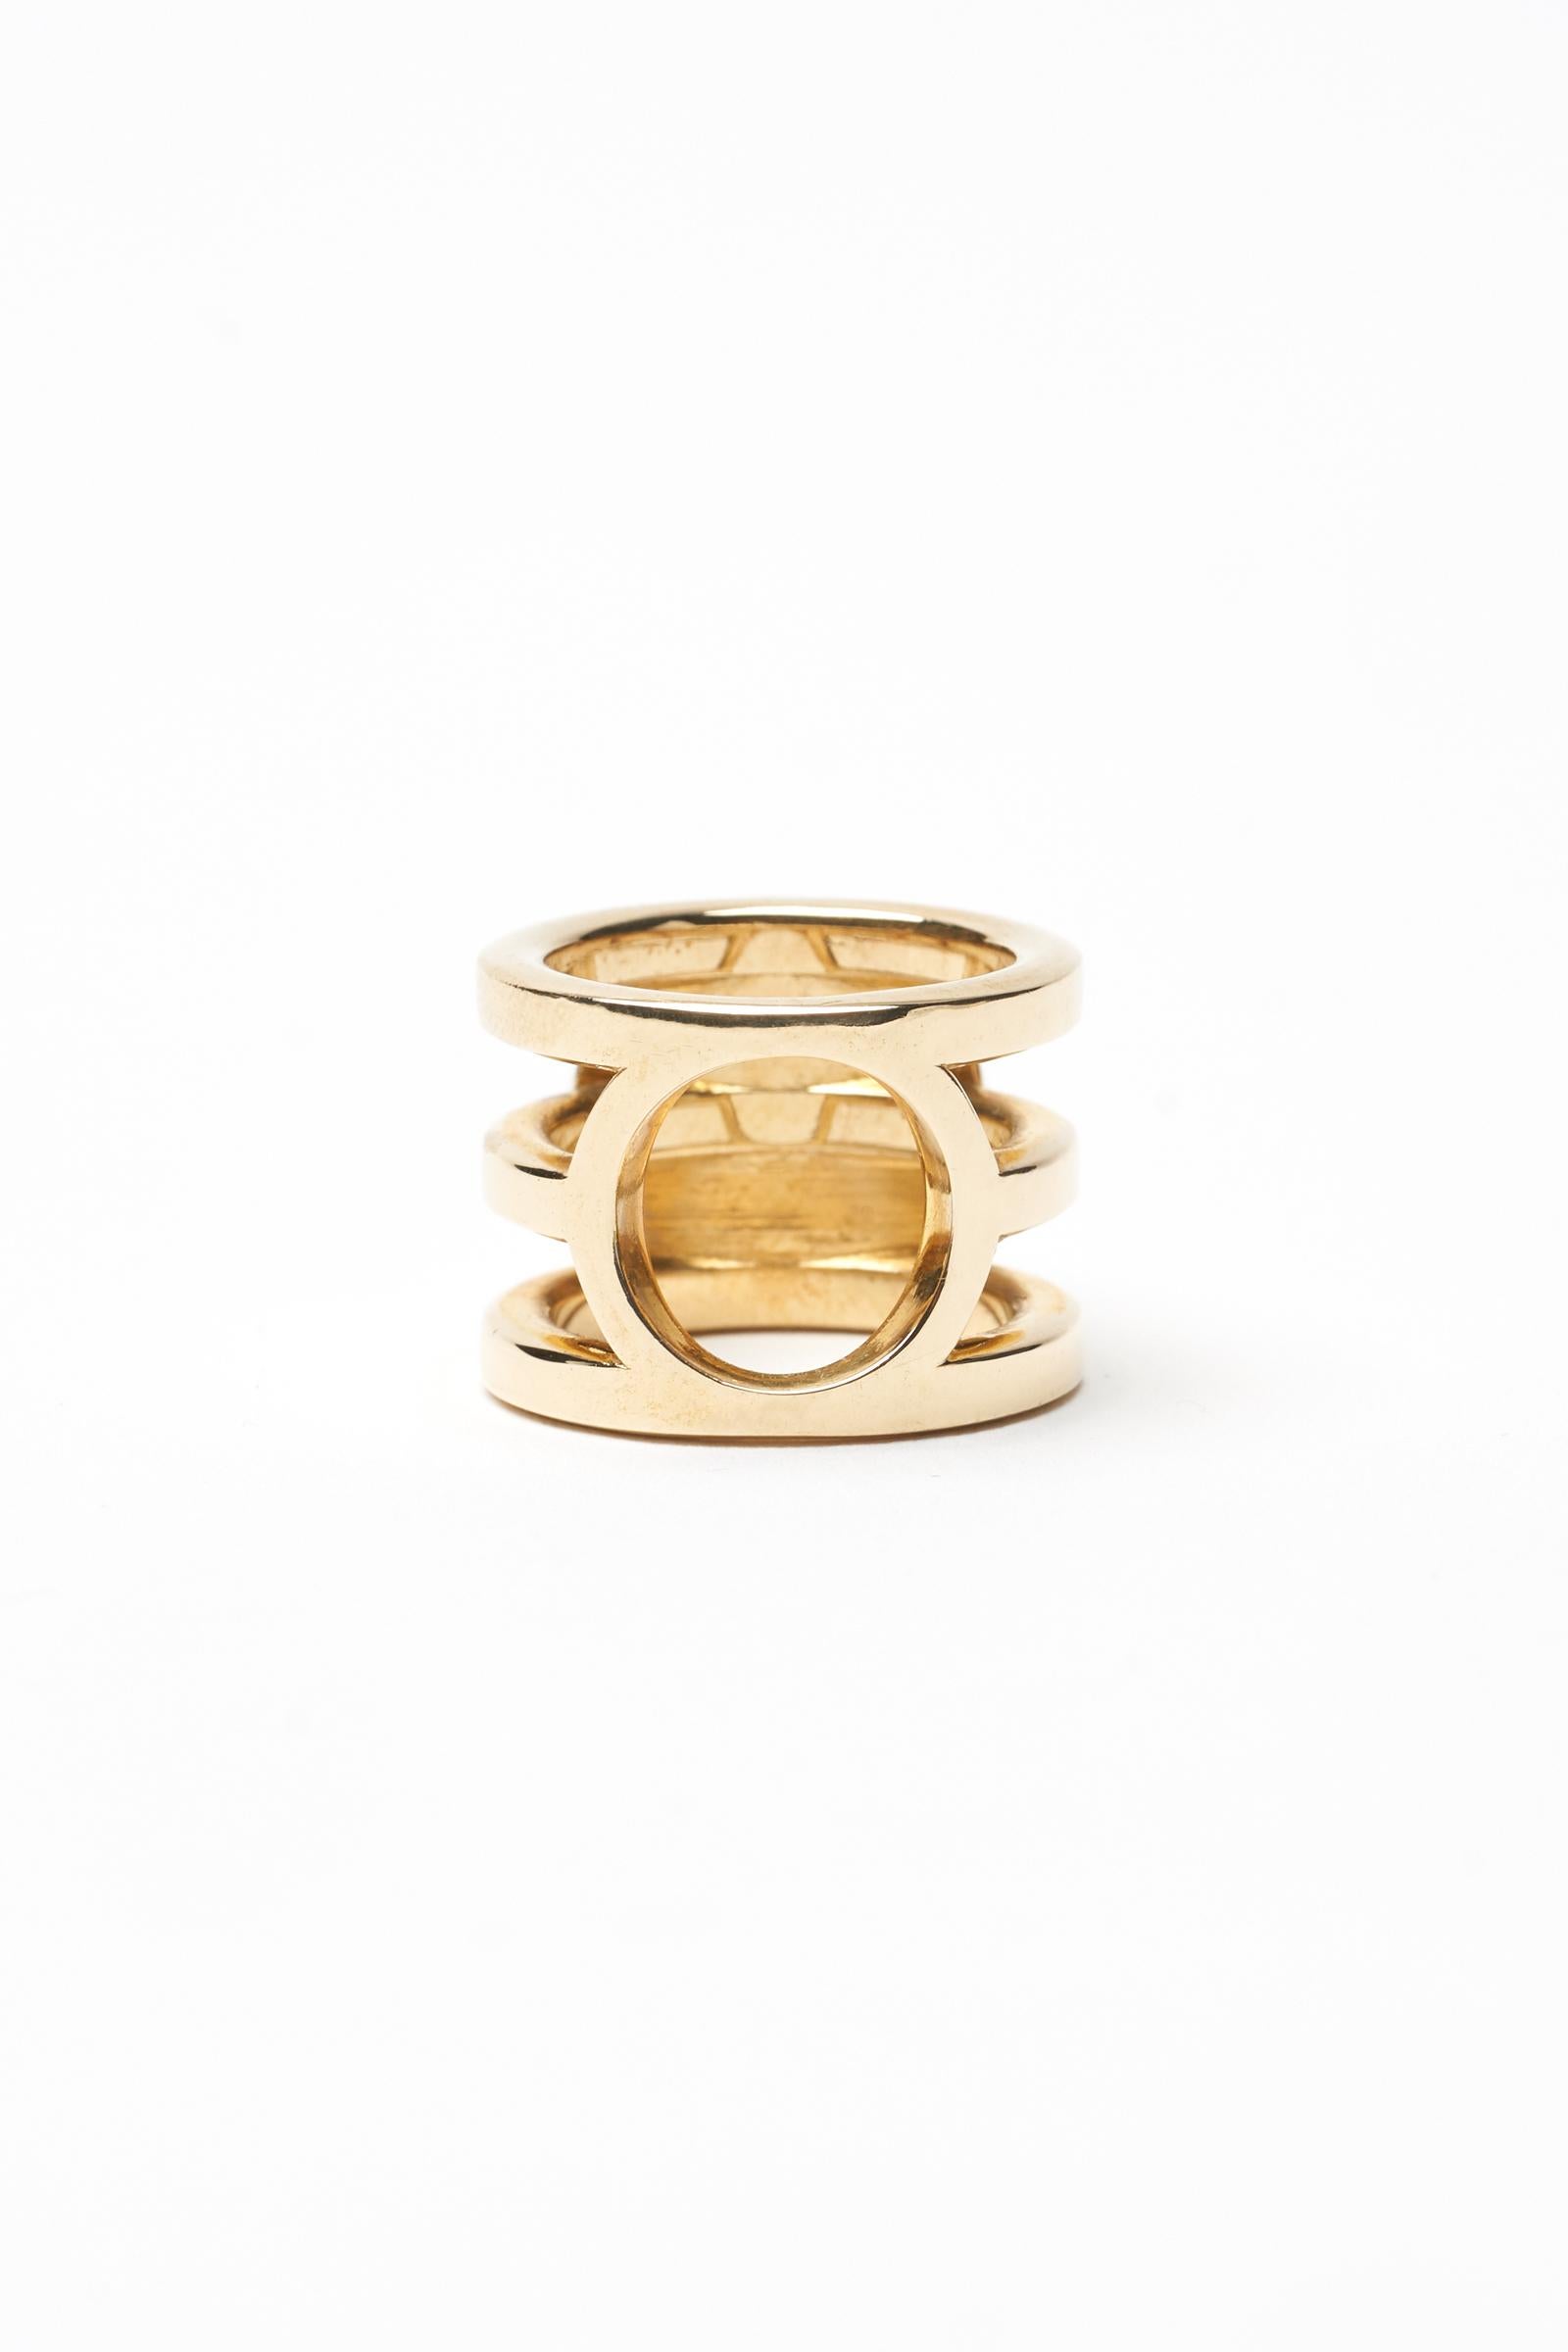 Contemporary Hand Carved 14 Karat Yellow or White Gold Kind of Mood Ring by S A D É. For Sale